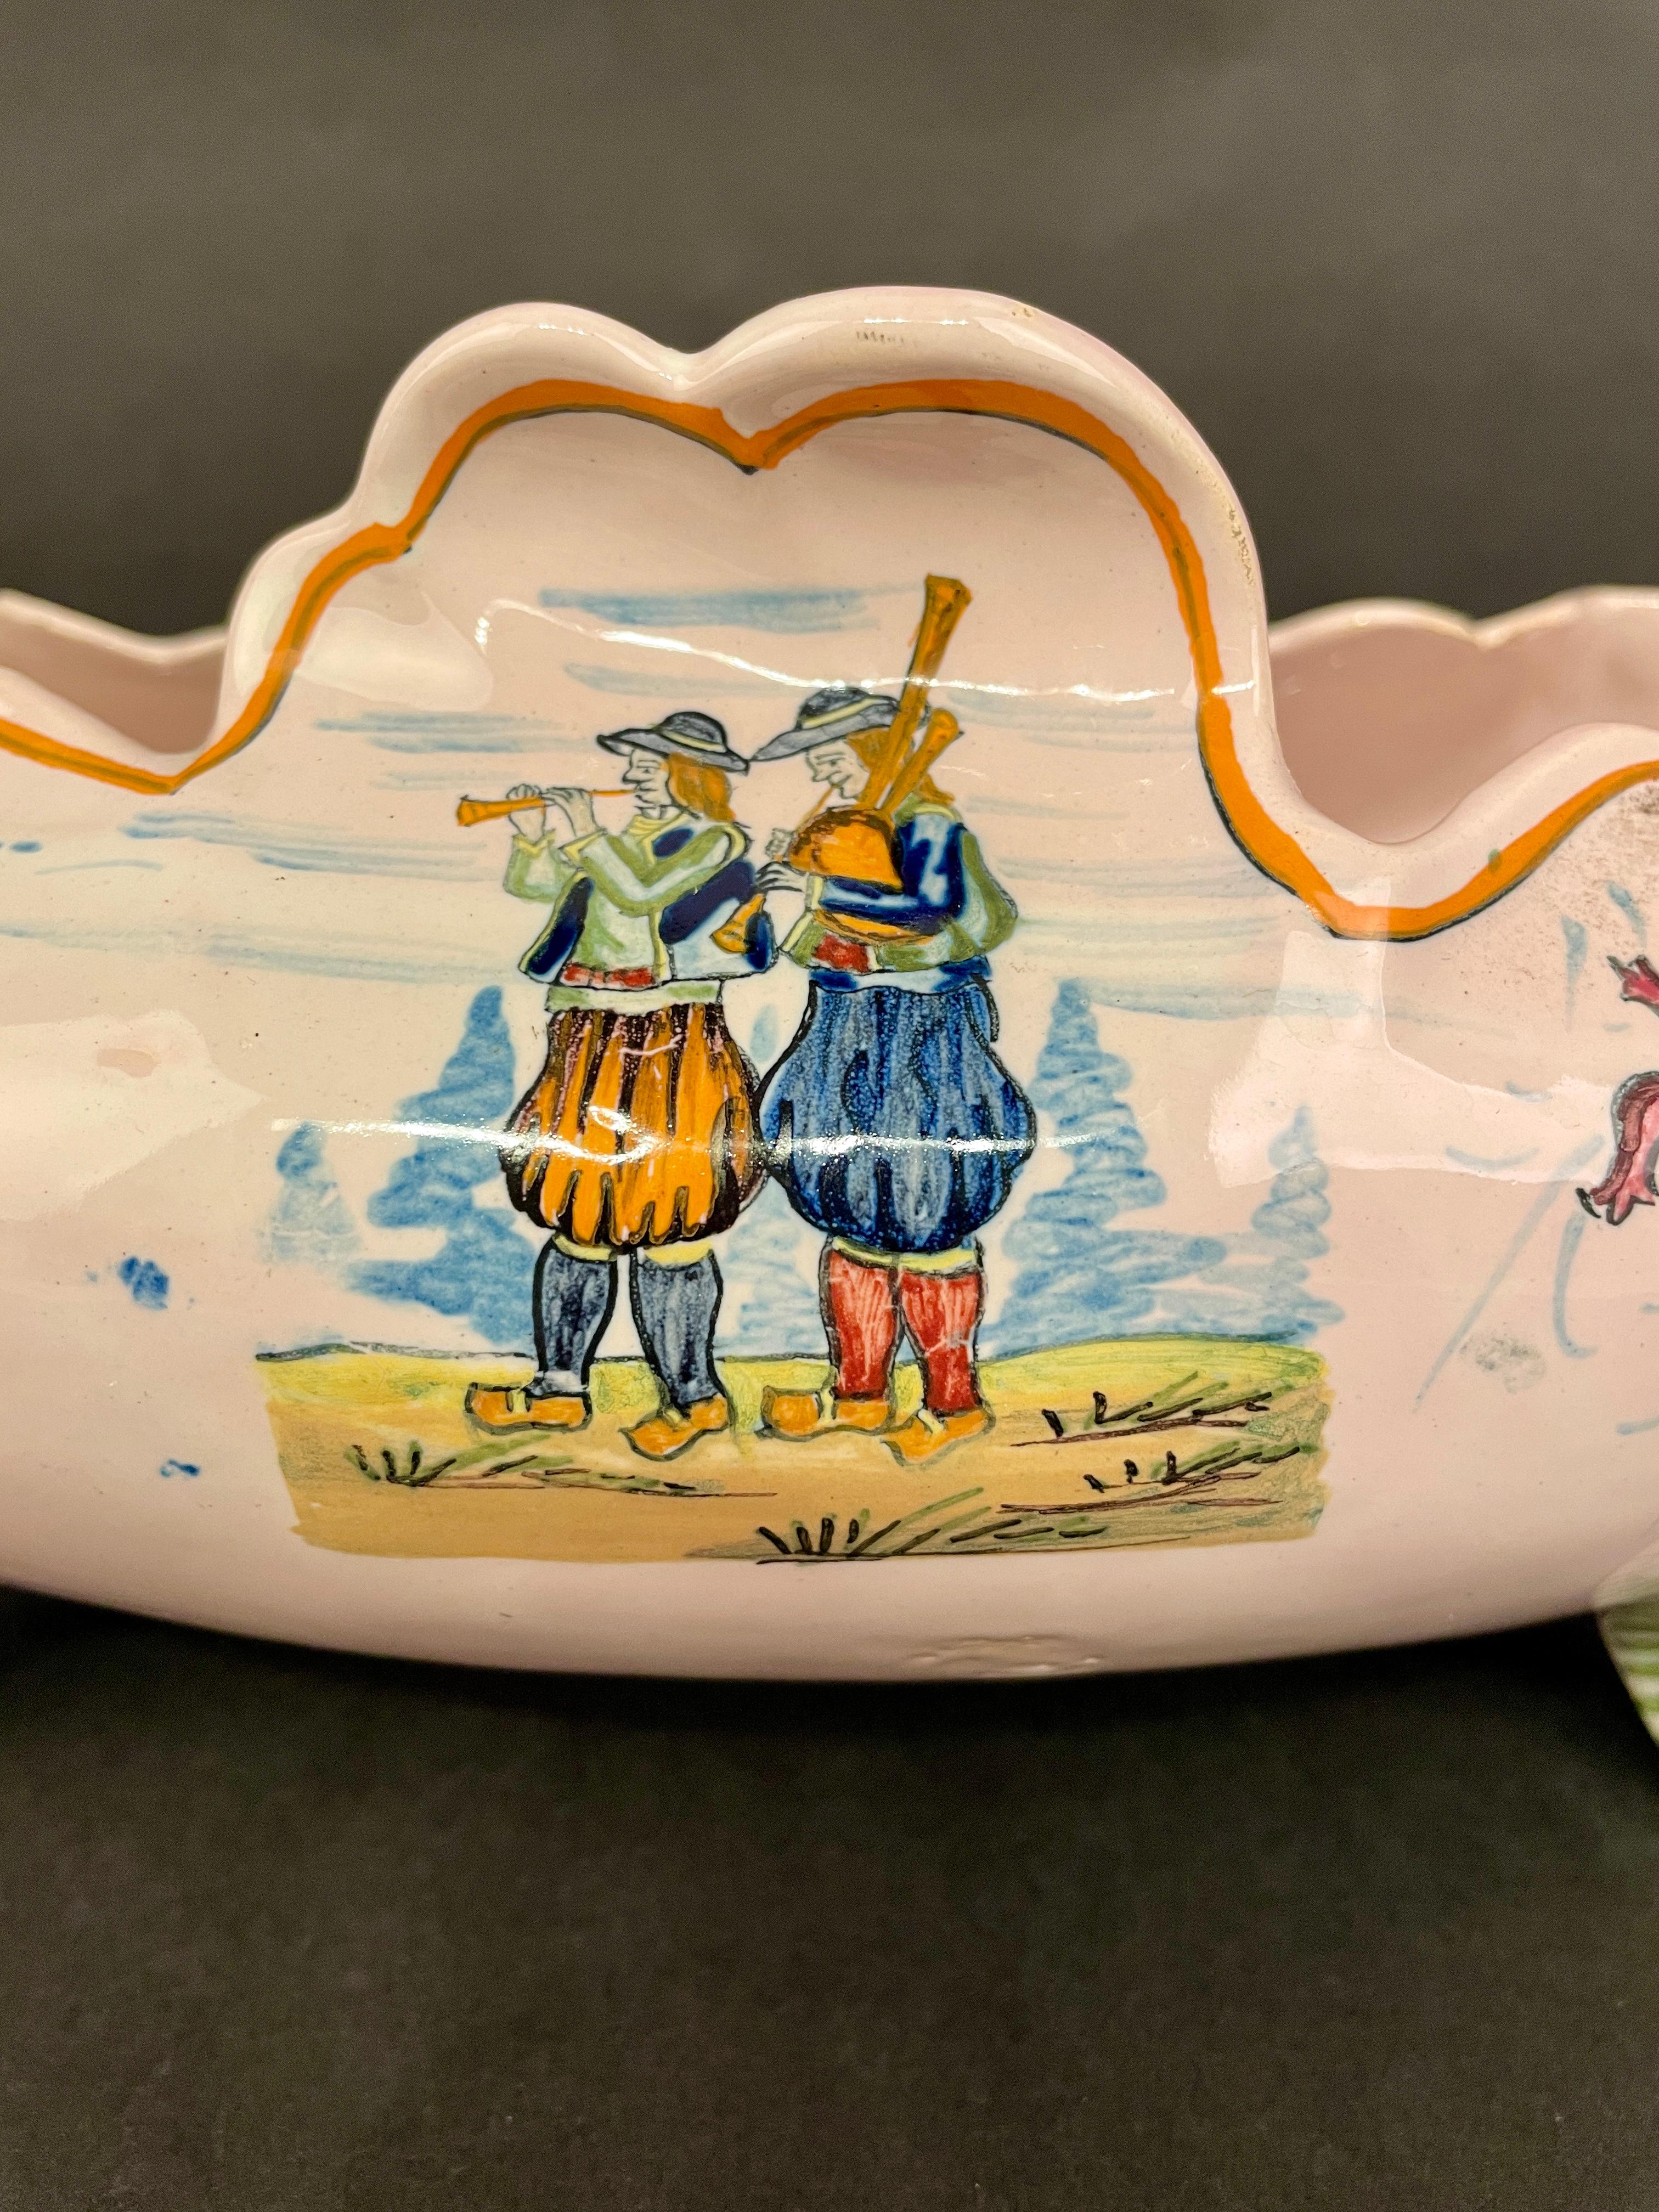 Henriot Quimper Faience Footed Jardiniere In Good Condition For Sale In Winter Park, FL